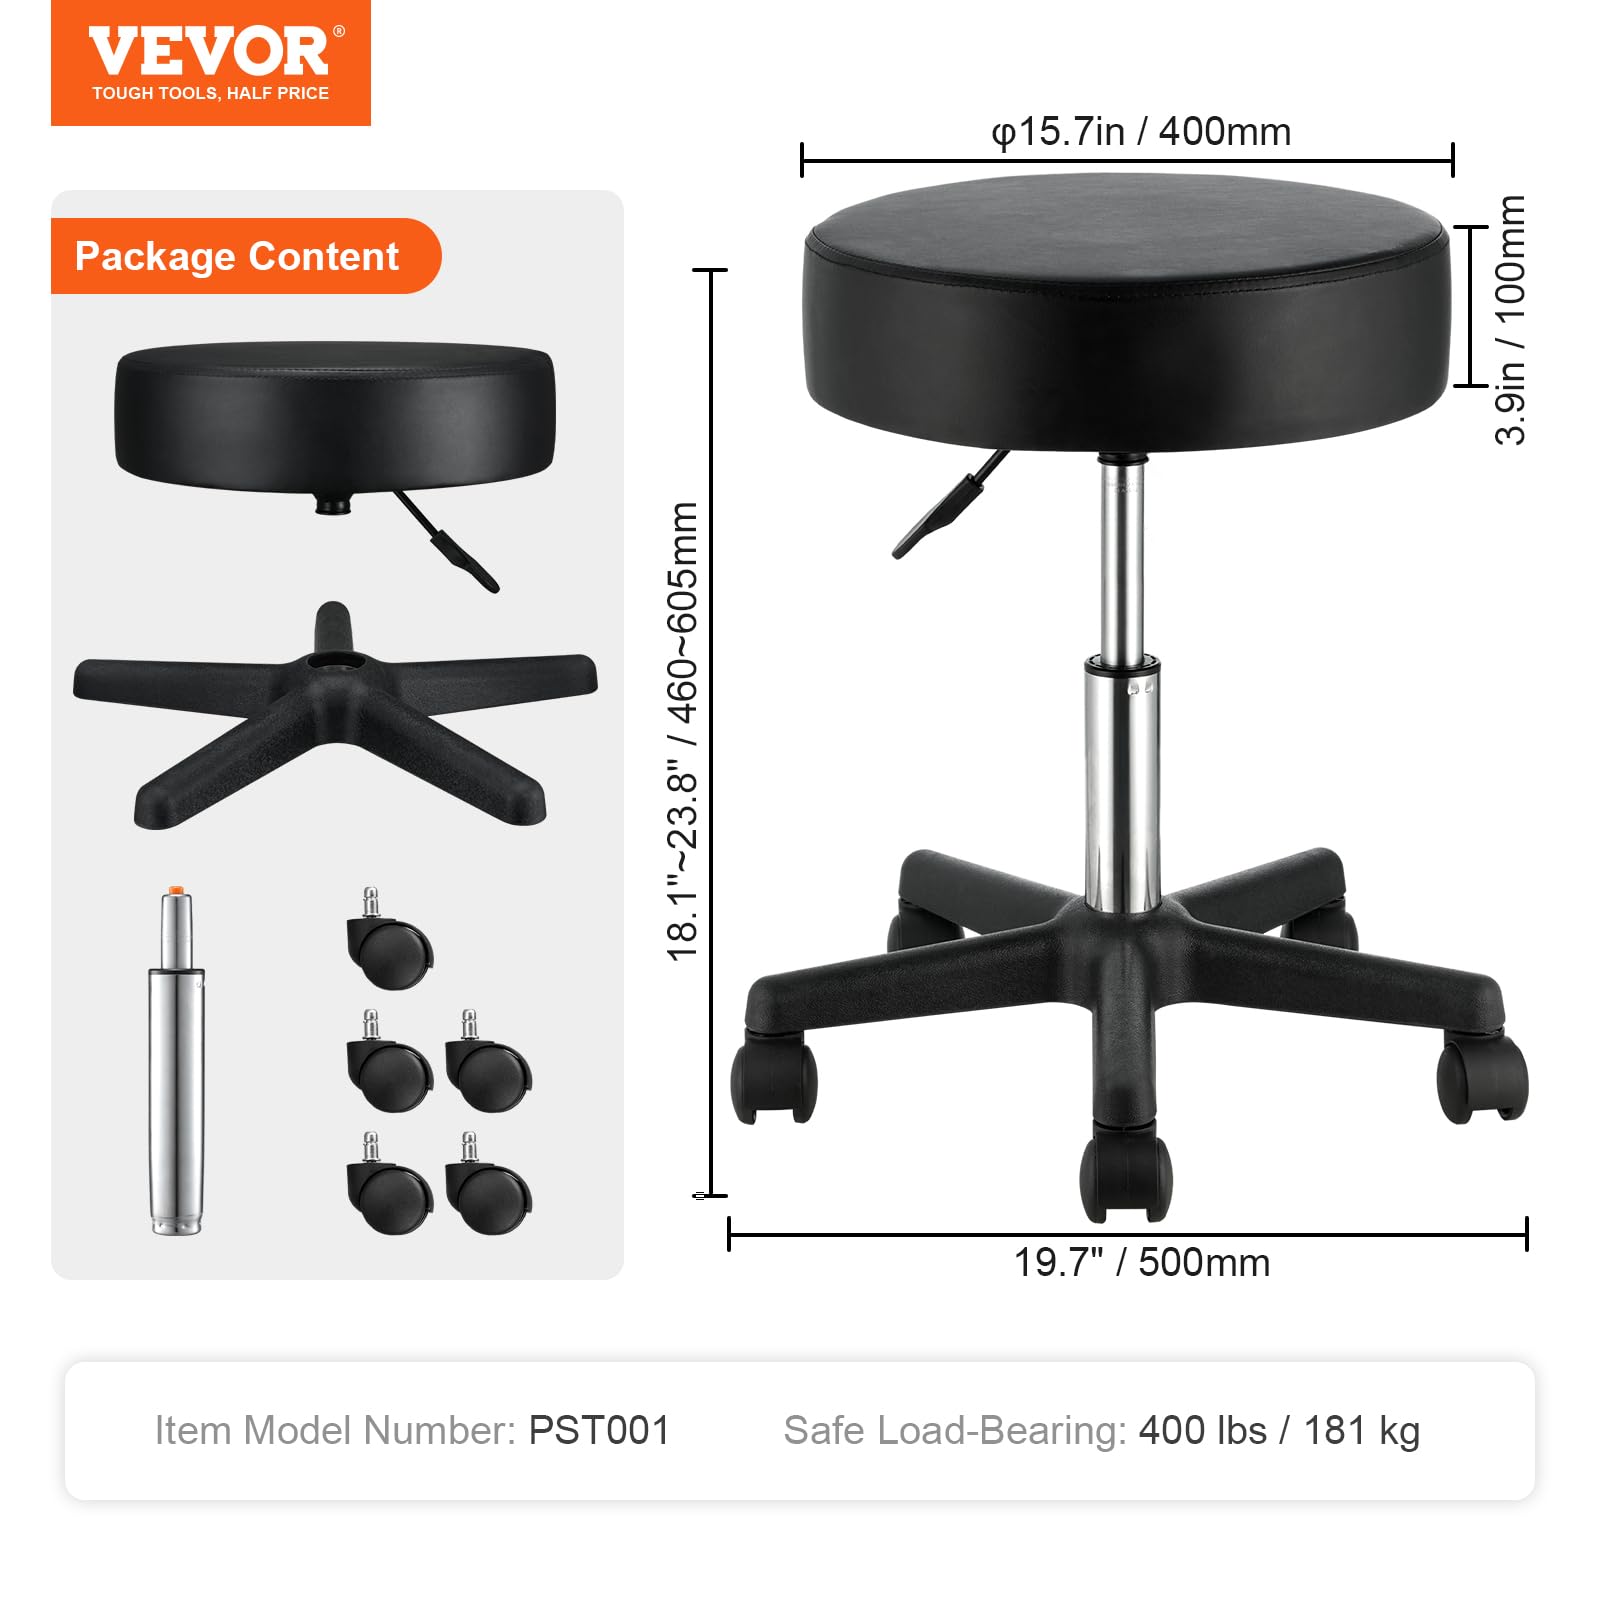 VEVOR Rolling Stool with Wheels, 400 LBS Weight Capacity Adjustable Height Stool with Ultra-Thick Seat Cushion, Swivel Stools Chair for Salon, Bar, Home, Office, Tatoo, Medical, Massage, Black